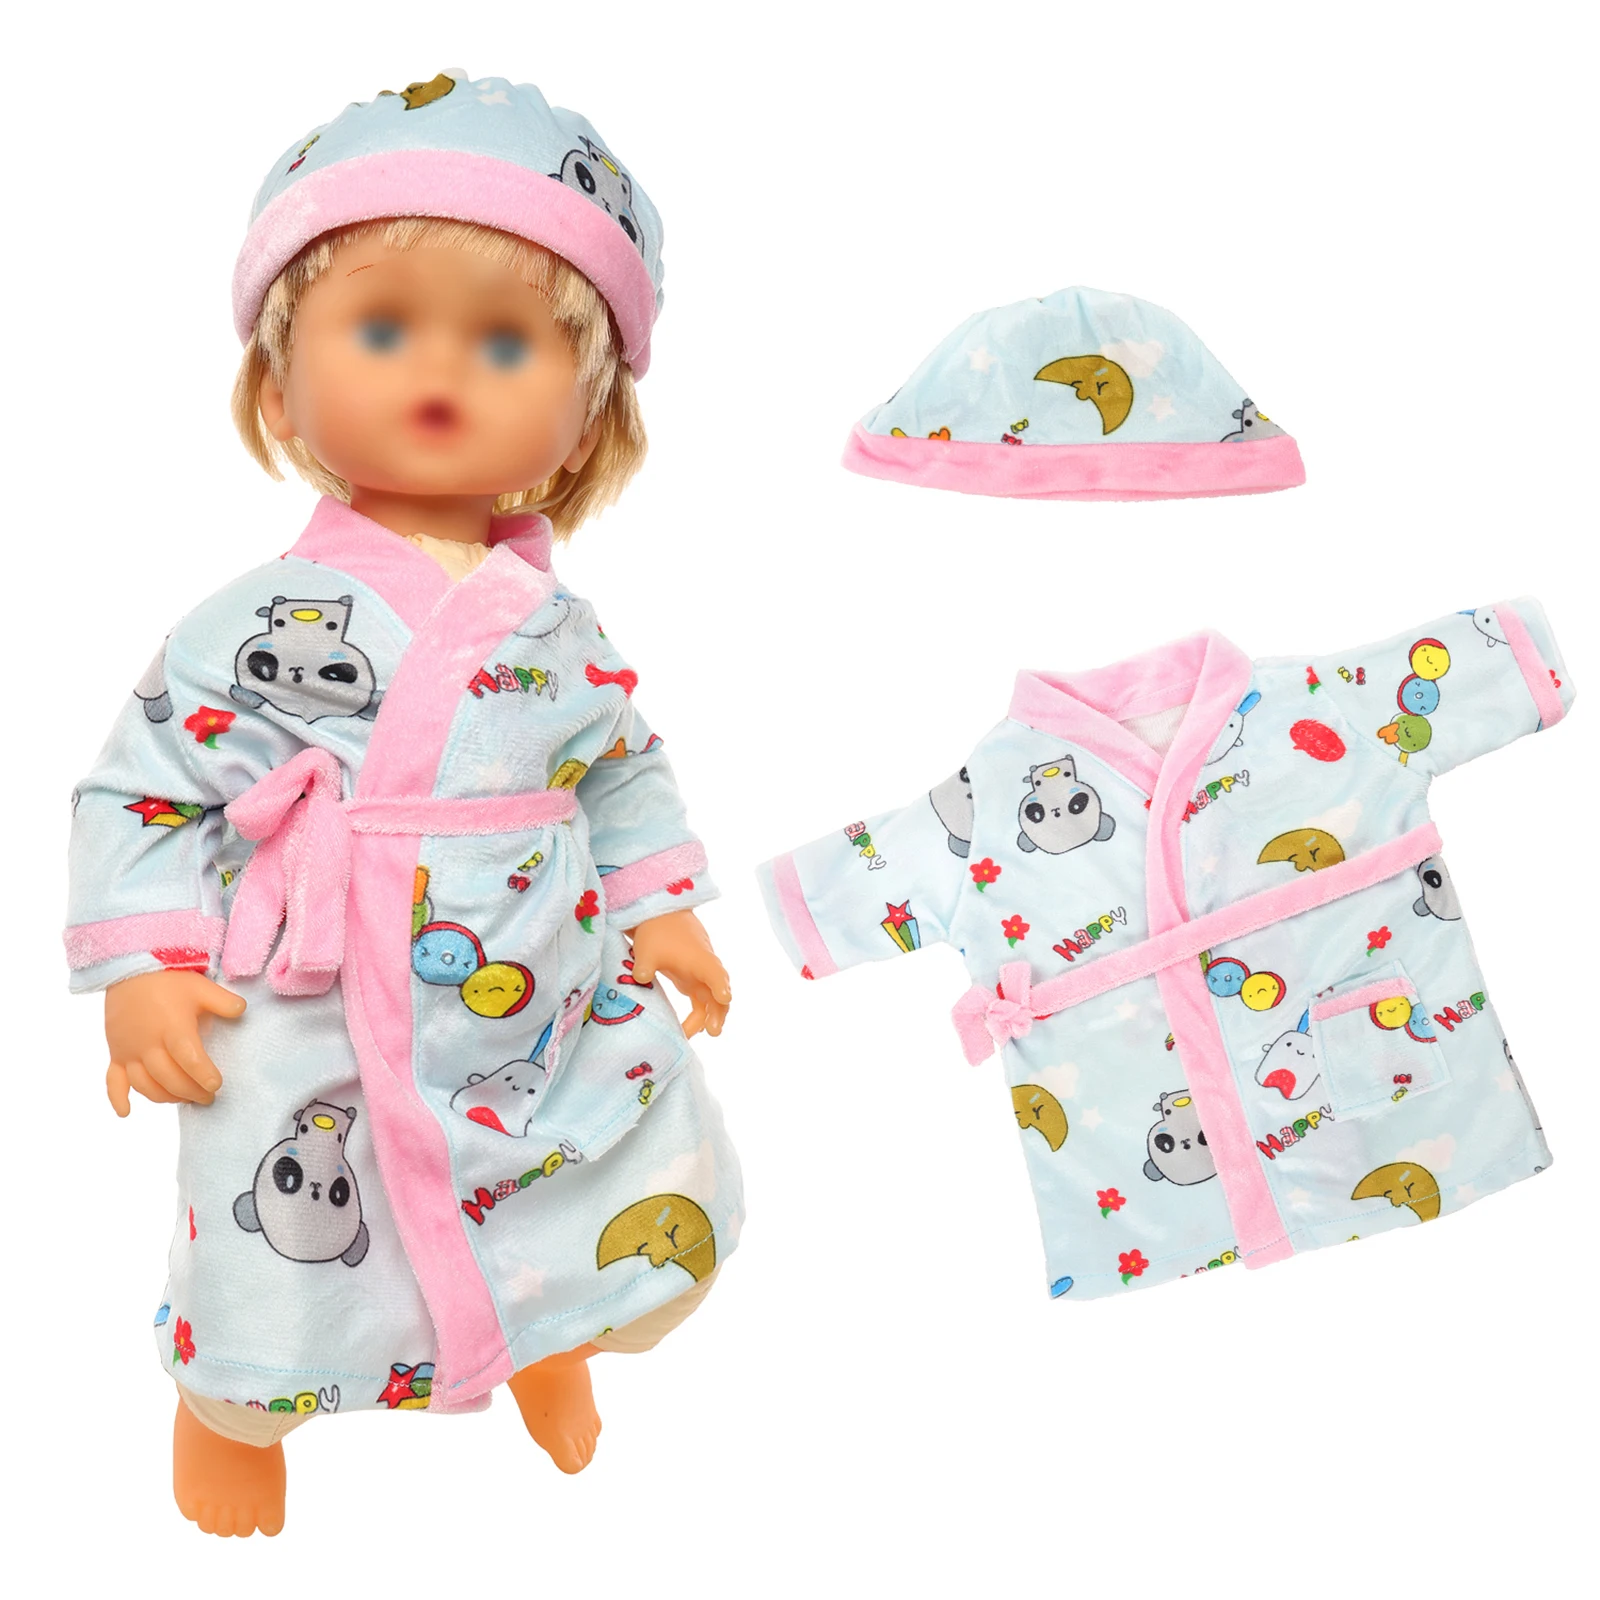 

Barwa 2023 New Cheap Fashion Handmade Clothes Doll blue nightgown+hat For For 20-22 Inch Doll 50-55cm Doll Clothes